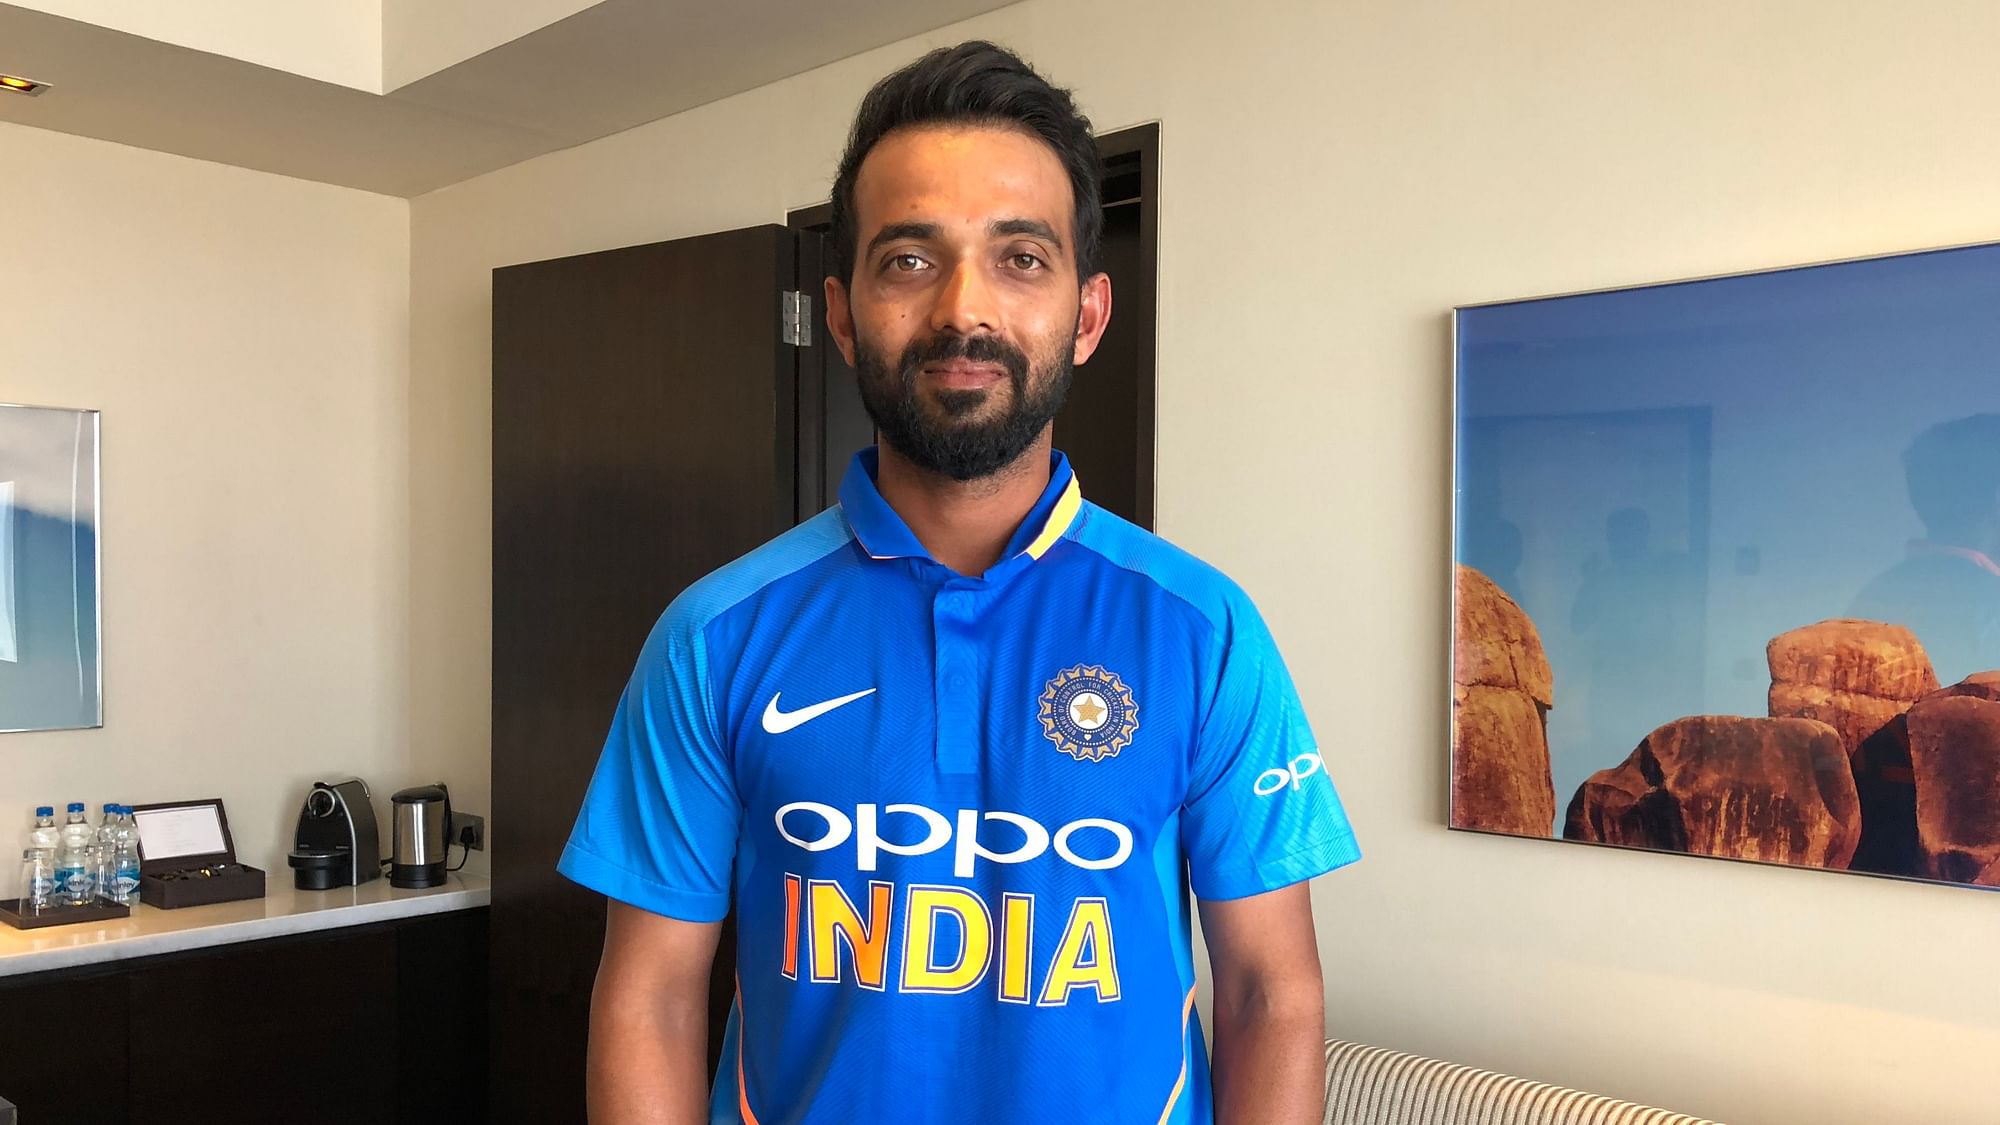 Indian cricketer Ajinkya Rahane said he’s still hopeful of making it to the Indian squad for the 2019 ICC World Cup.